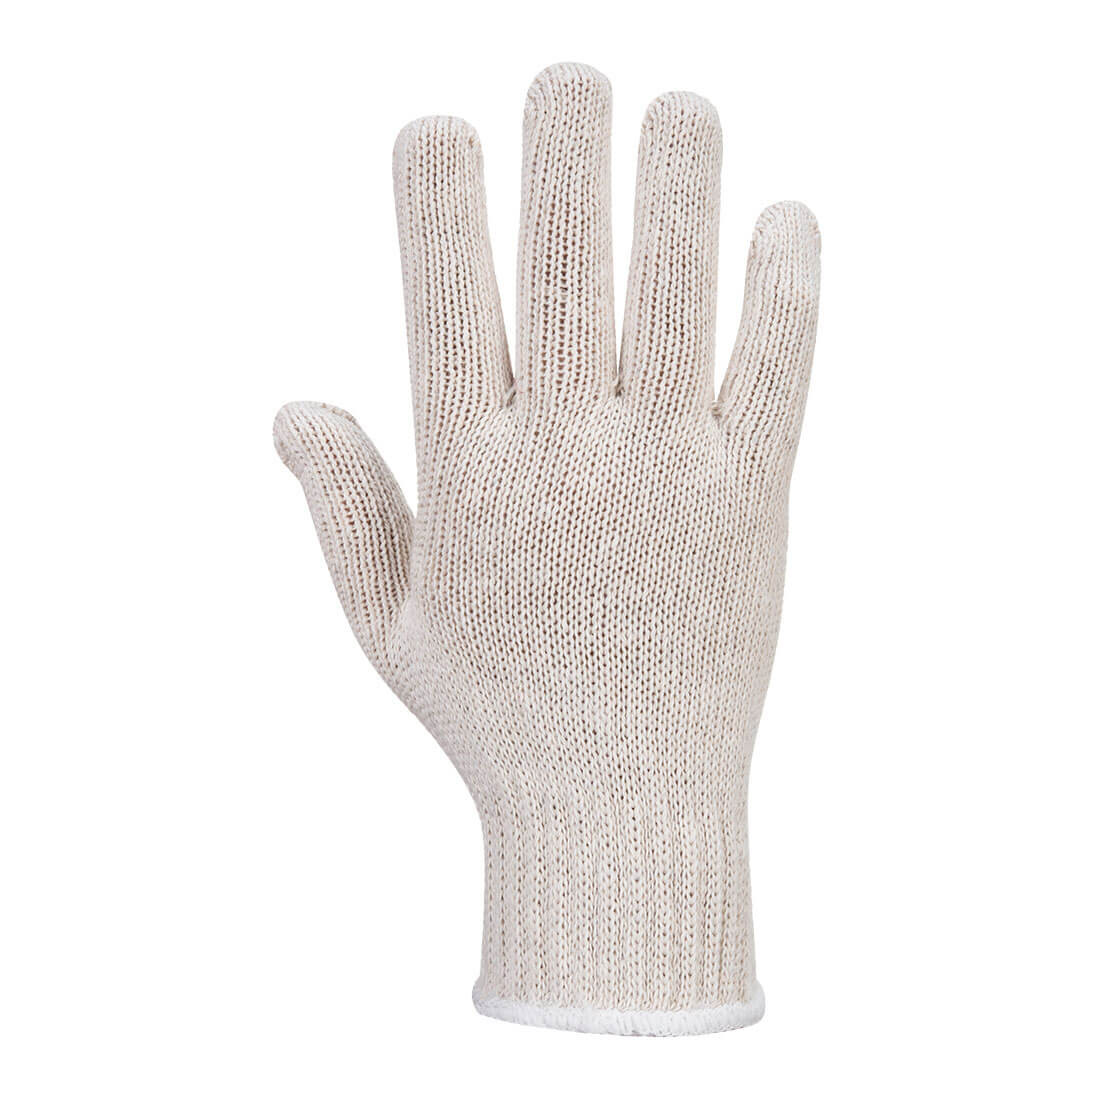 String Knit Liner Glove (288 Pairs) - Personal protection